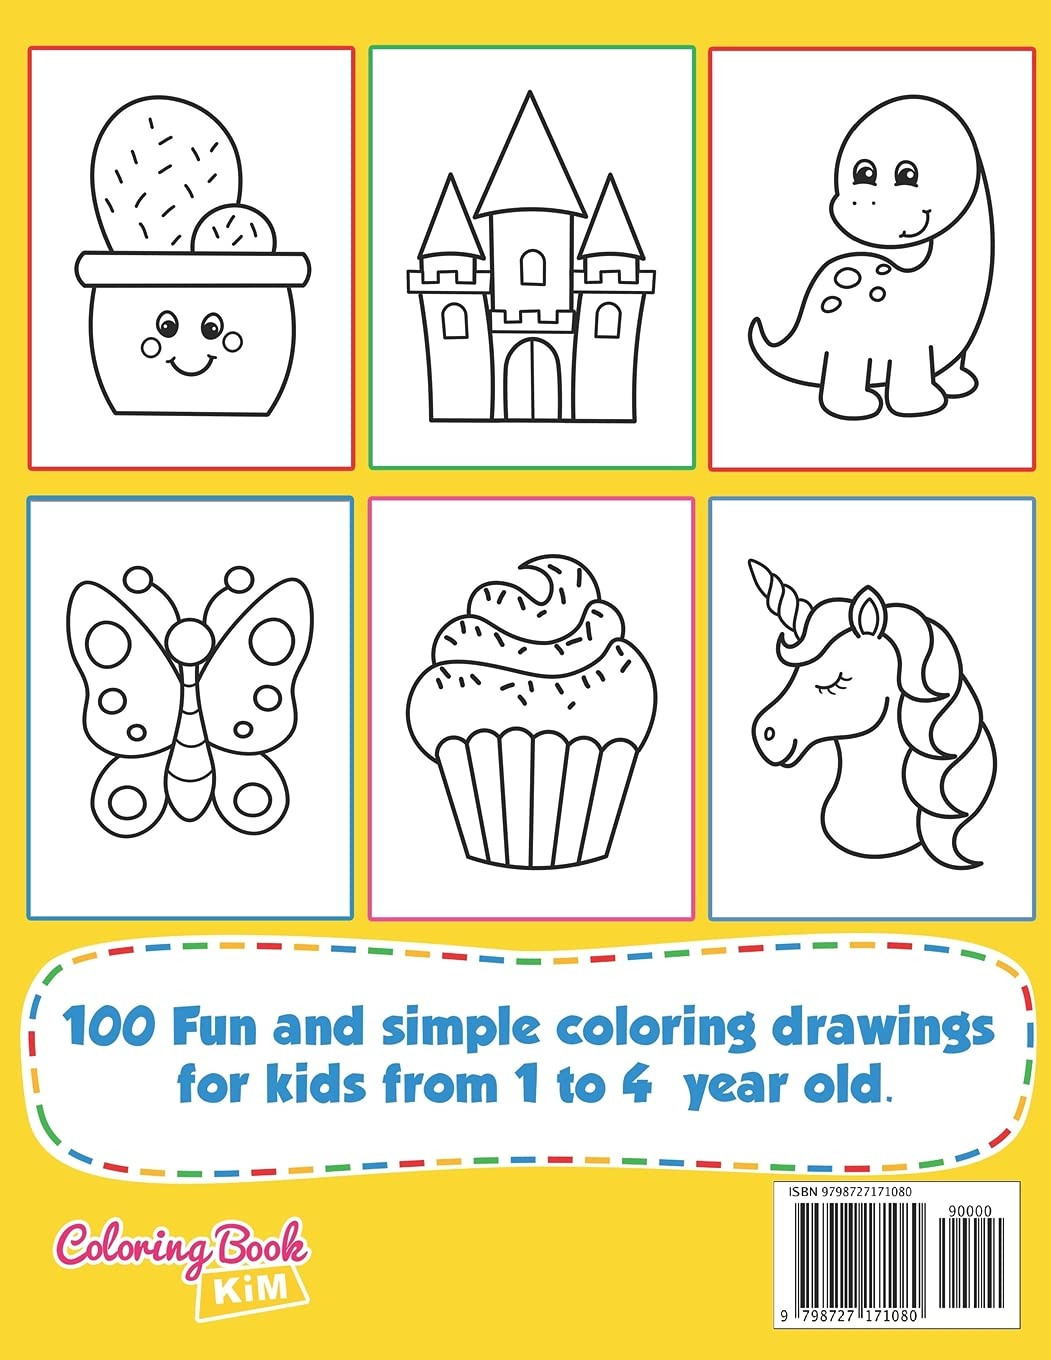 Simple & Big Coloring Book for Toddler: 100 Easy and Fun Coloring Pages for  Kids, Preschool and Kindergarten (For Kids Ages 1-4) - The Book Crafts